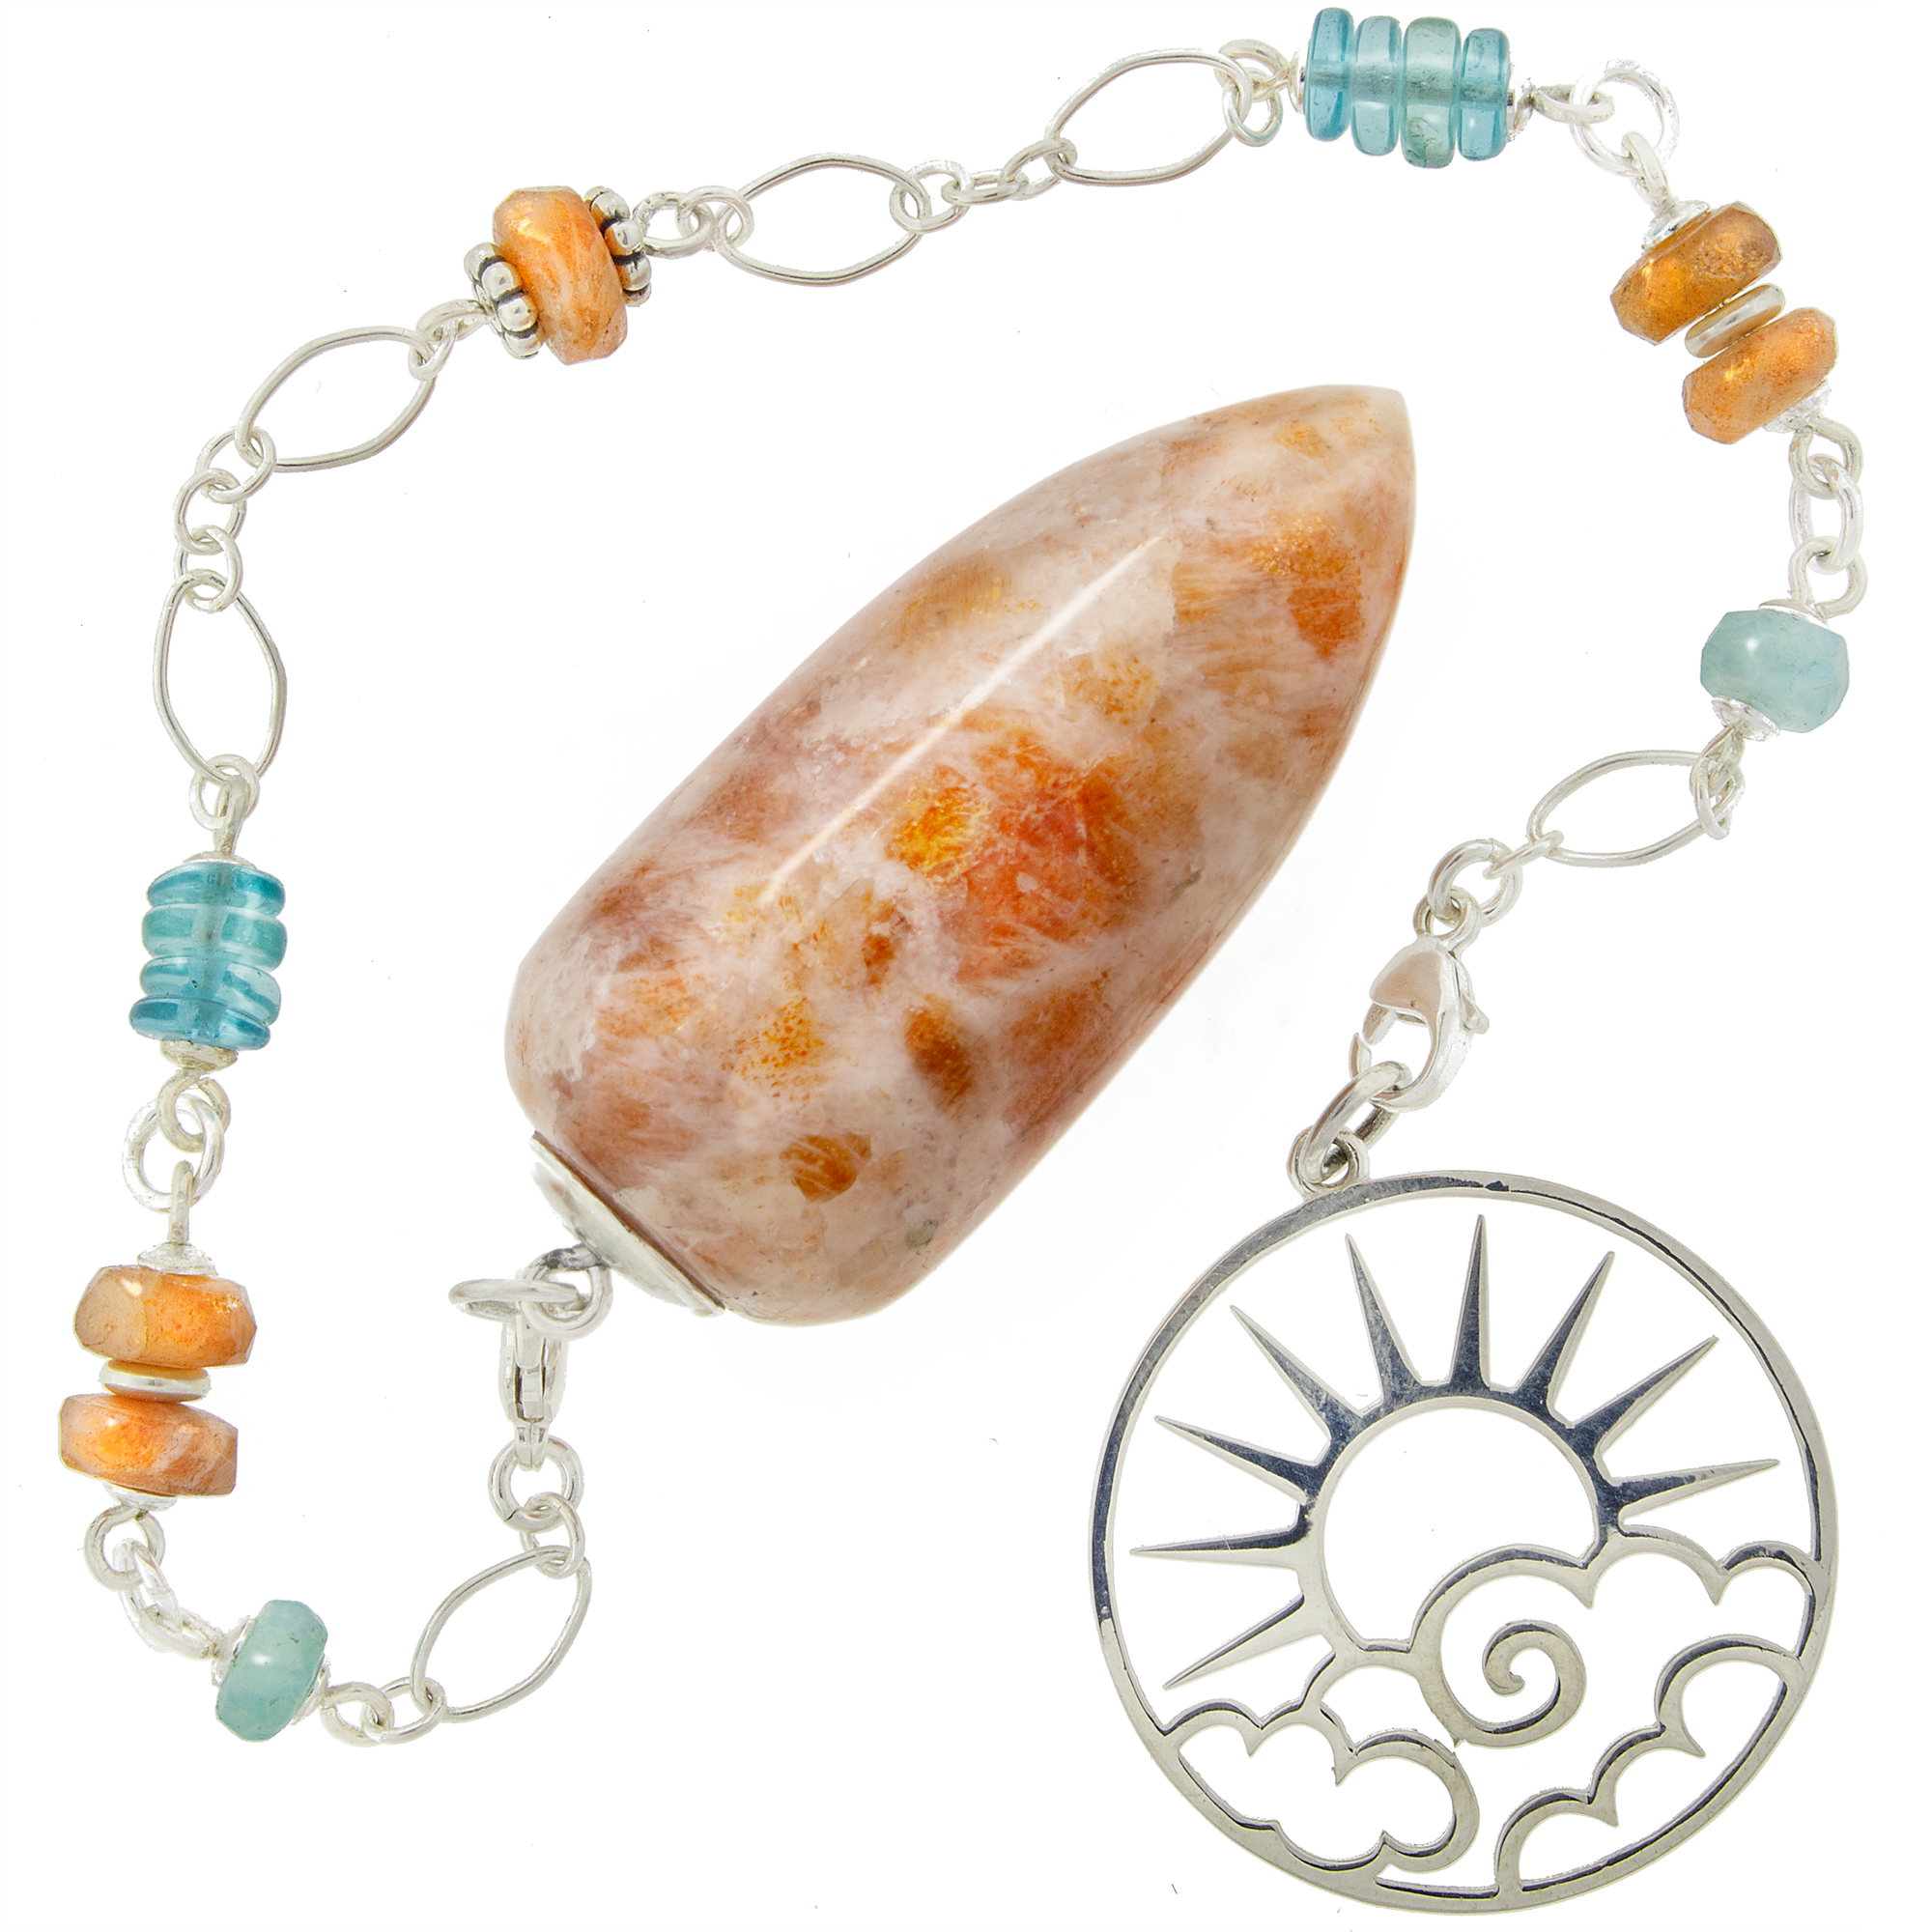 One of a Kind #393 - Sunstone, Apatite, Peruvian Blue Opal and Sterling Silver Pendulum by Ask Your Pendulum